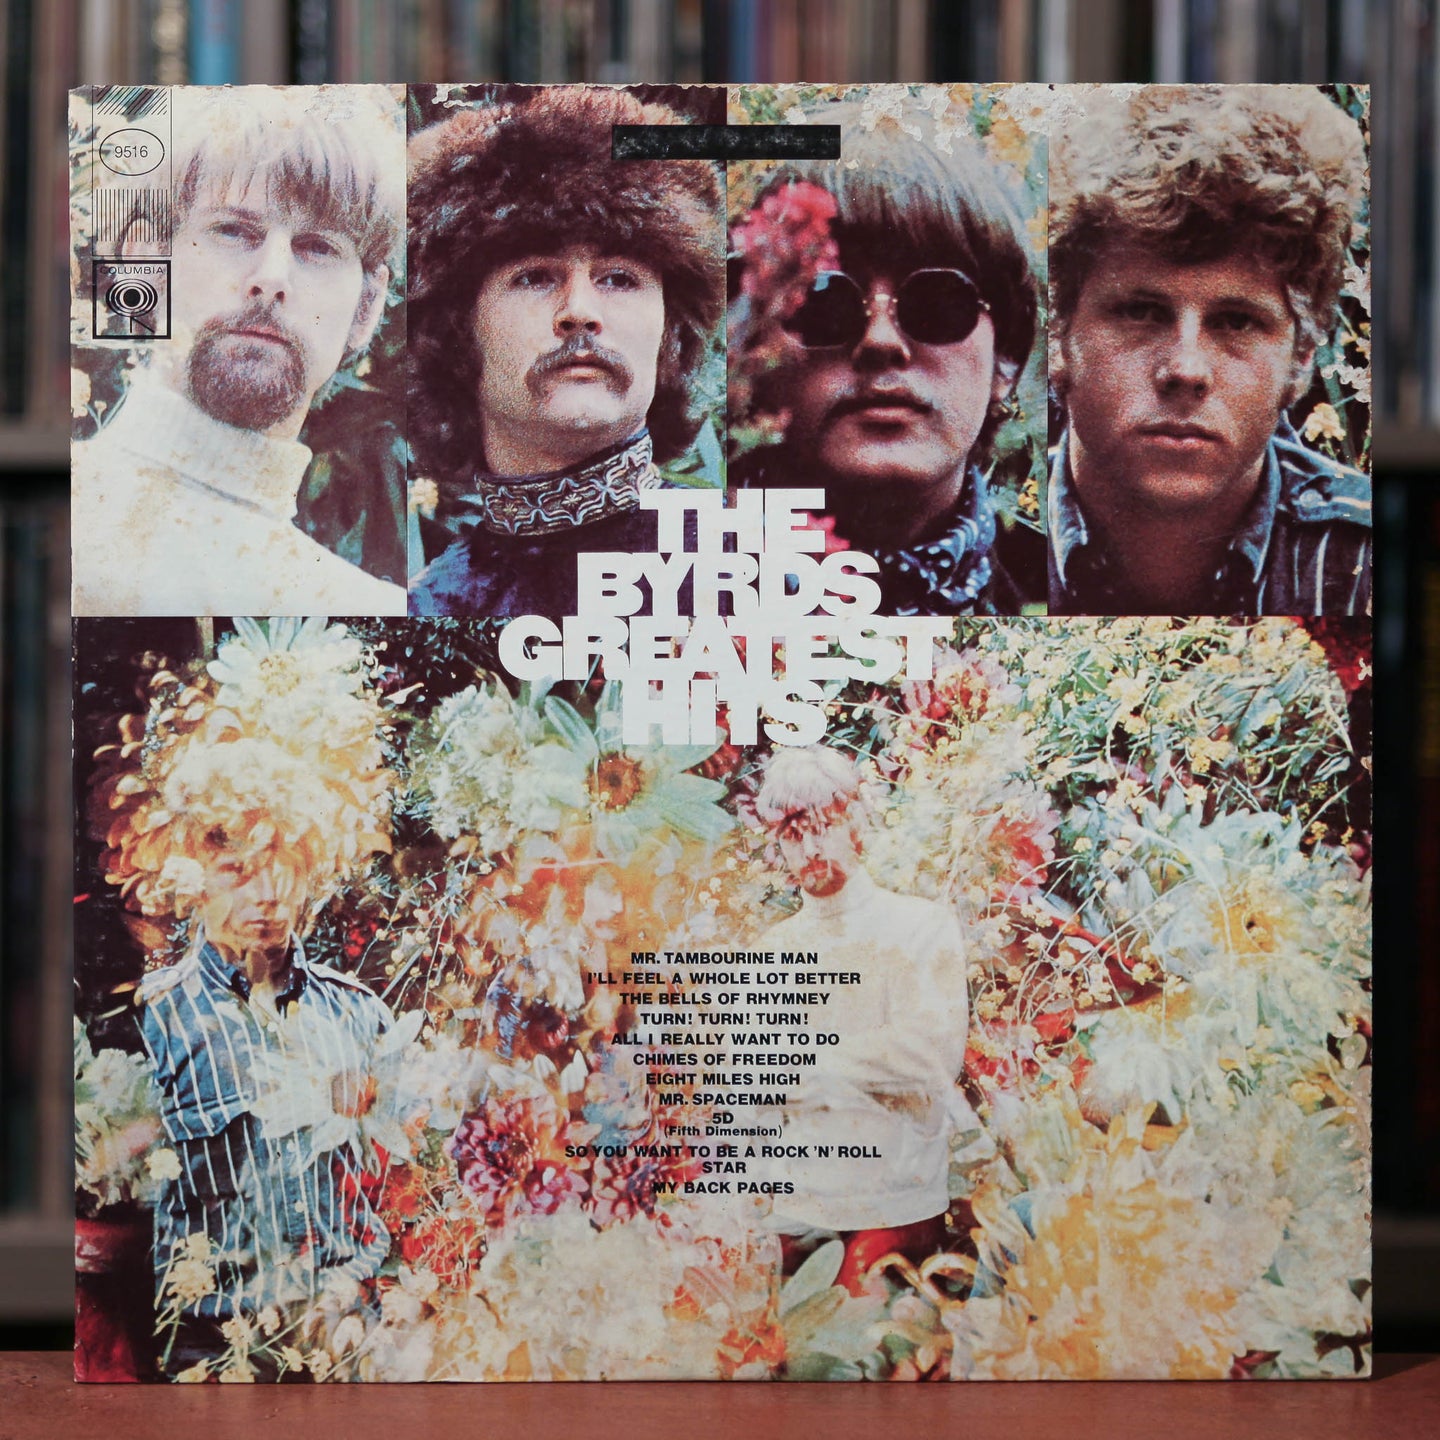 The Byrds - The Byrds' Greatest Hits - 1970 Columbia, VG/VG+